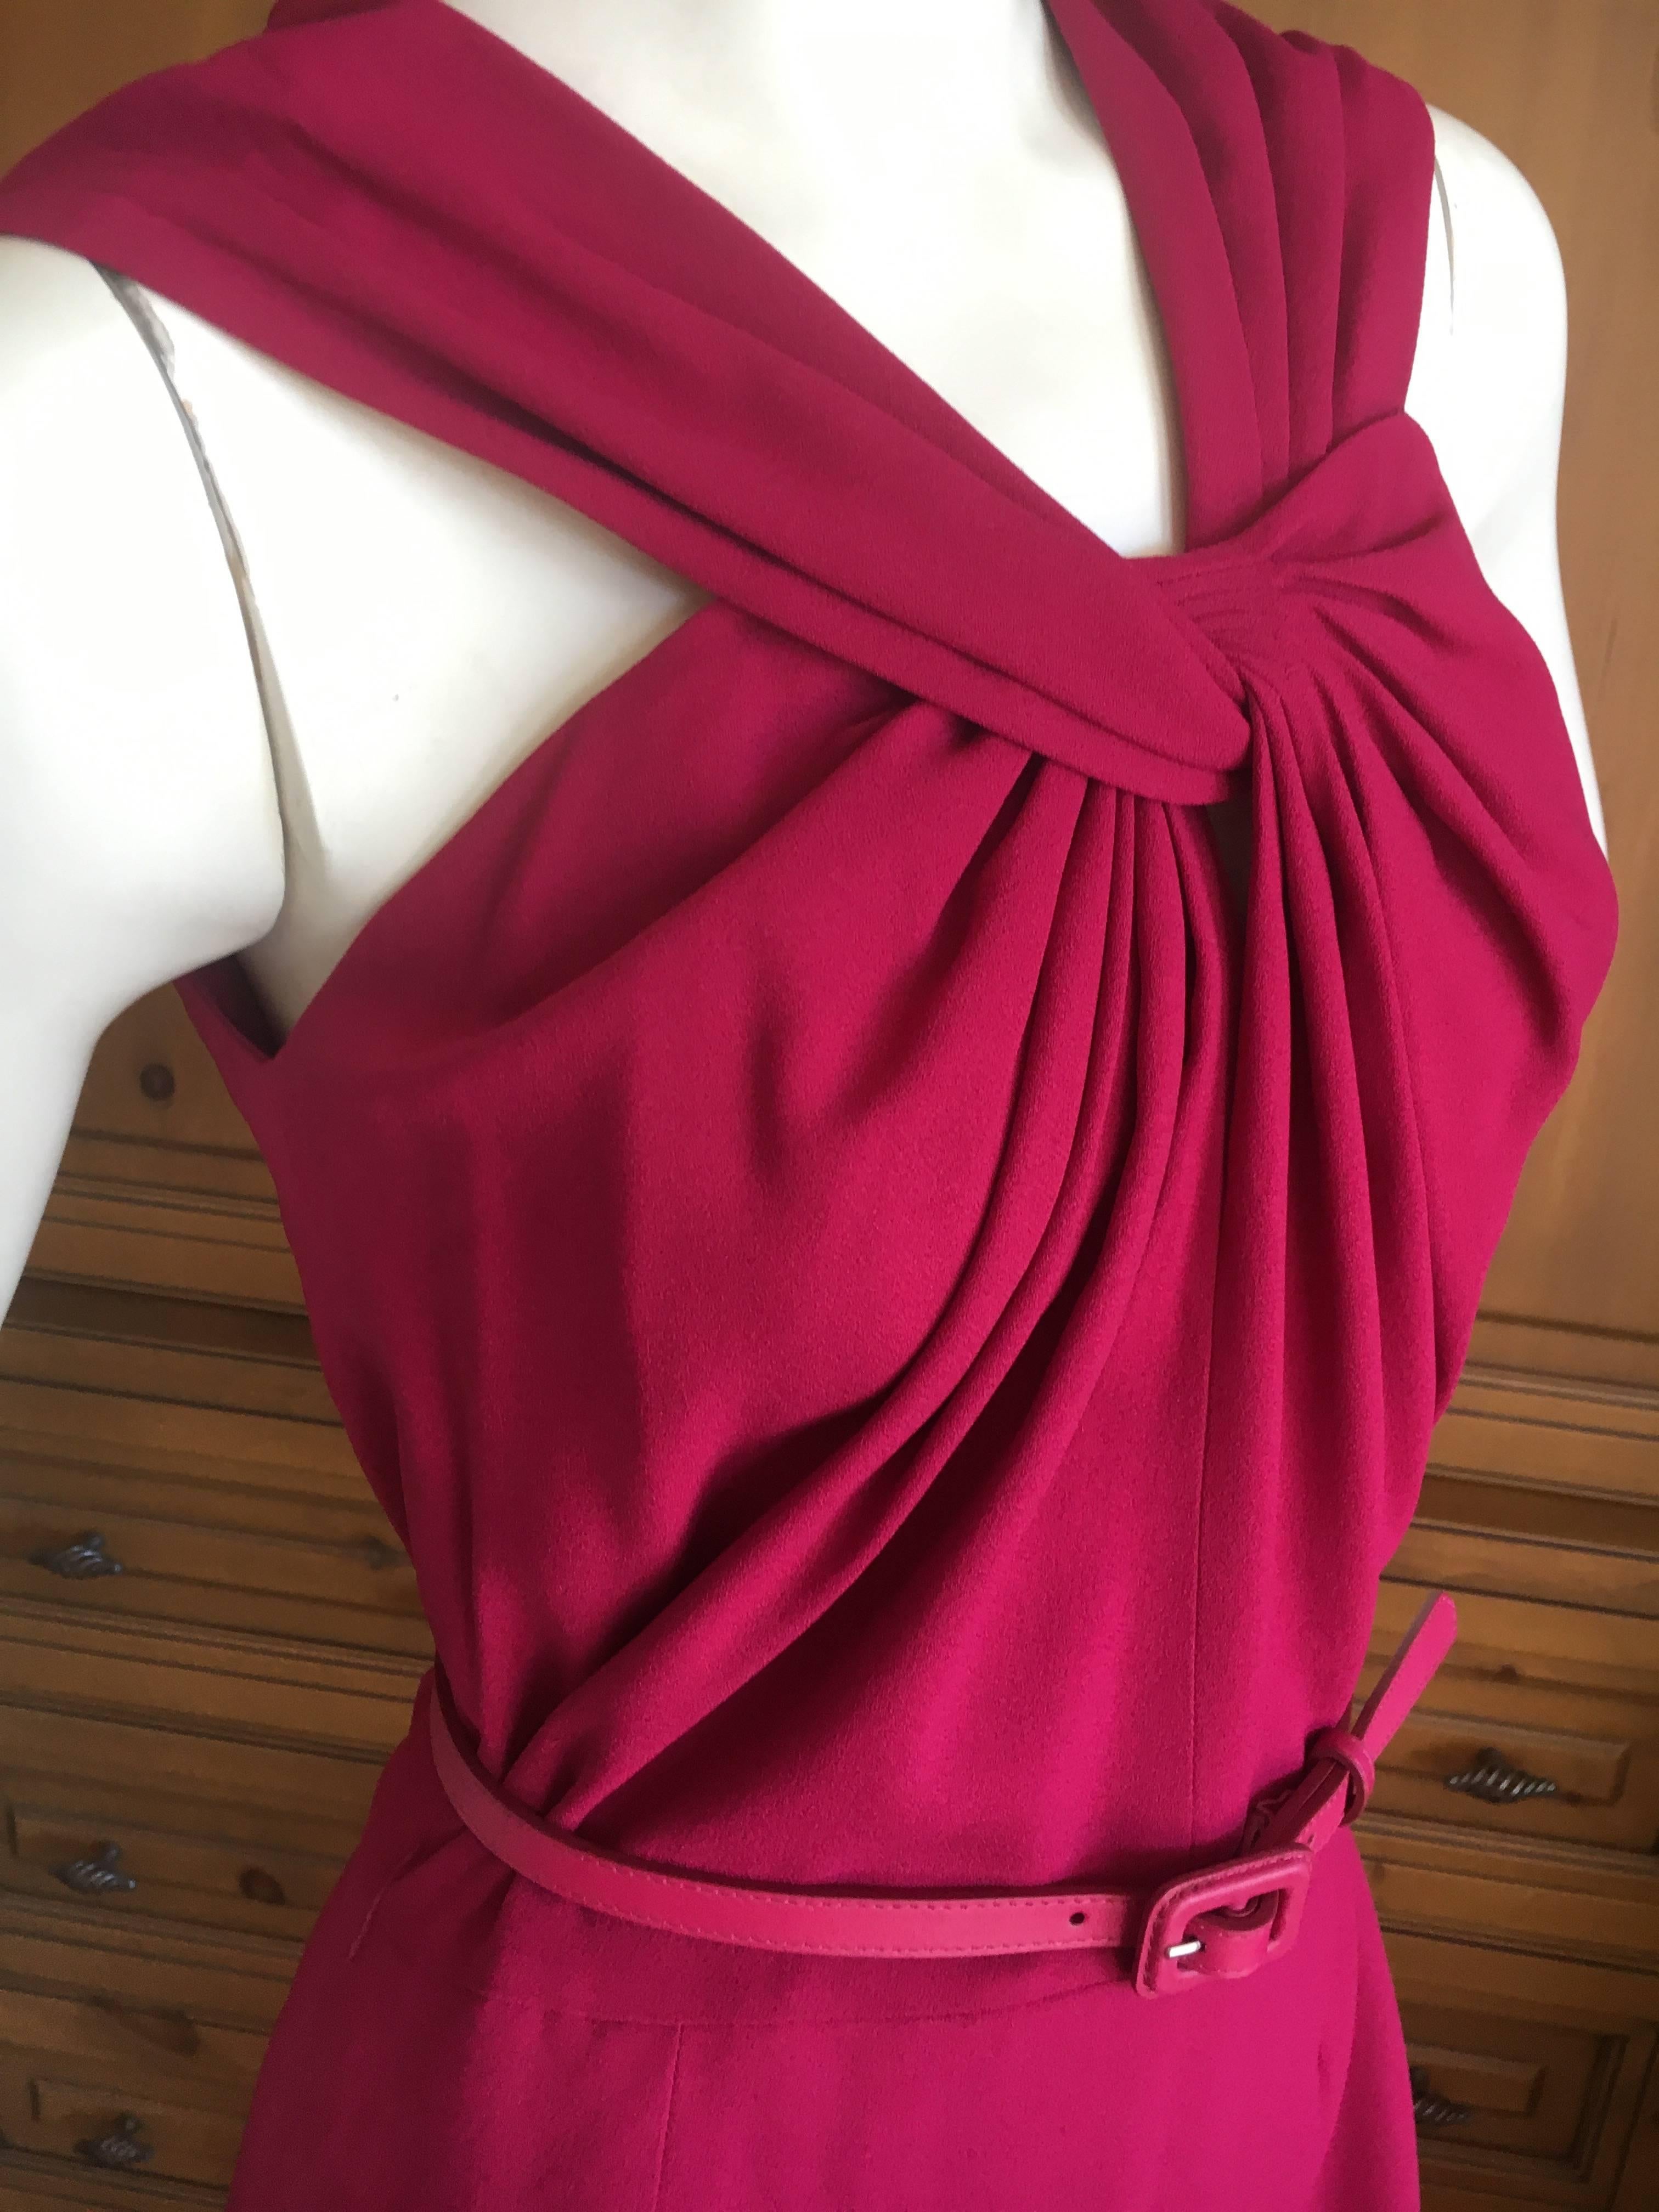 Christian Dior by John Galliano Fuscia Belted Day Dress In Excellent Condition For Sale In Cloverdale, CA